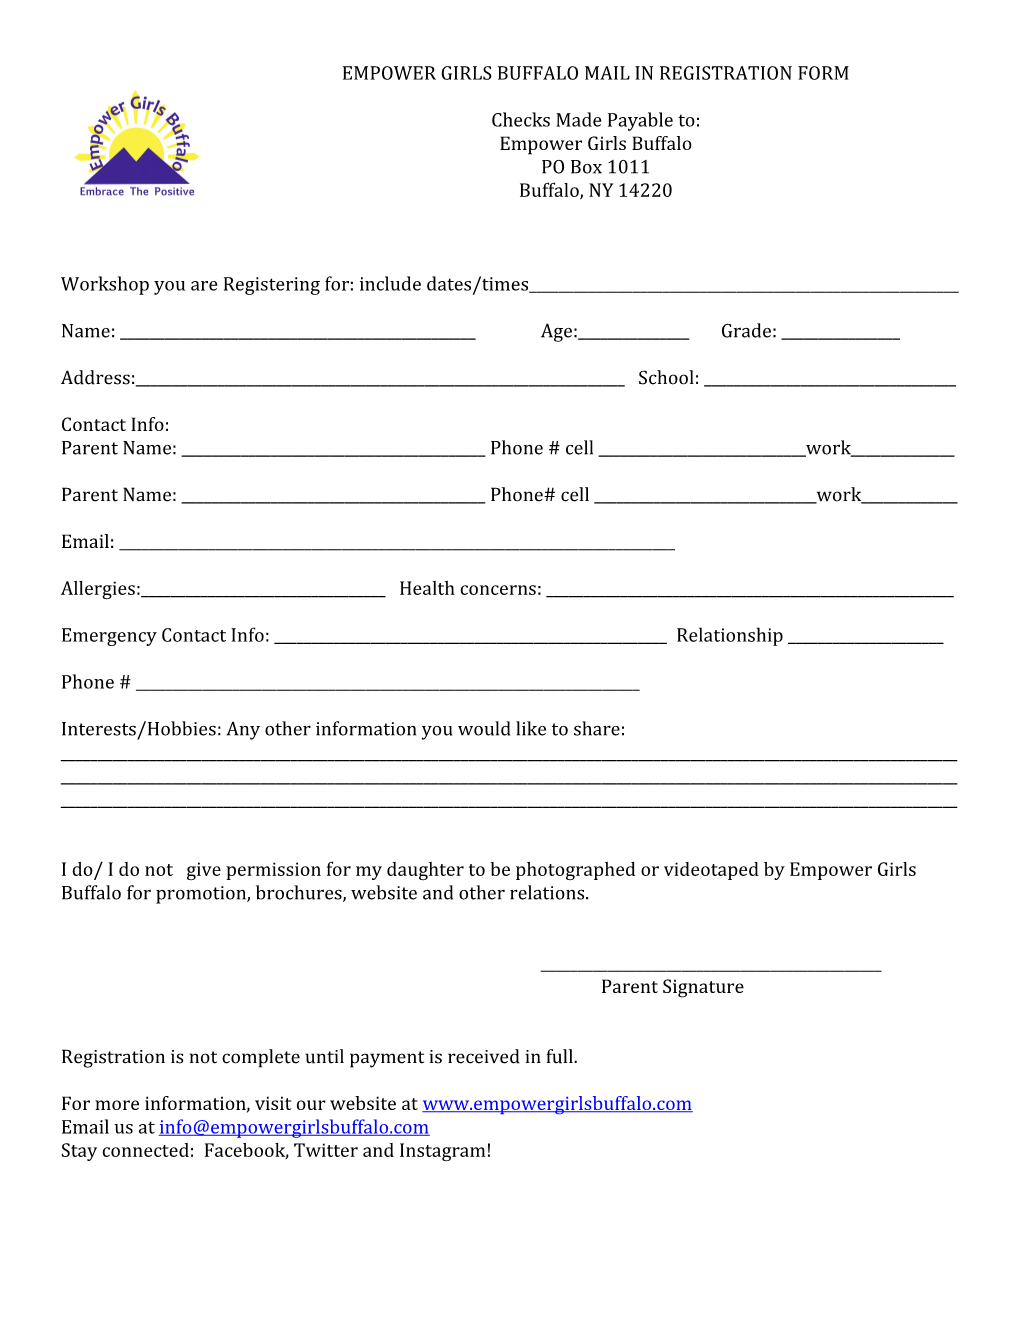 Empower Girls Buffalo Mail in Registration Form